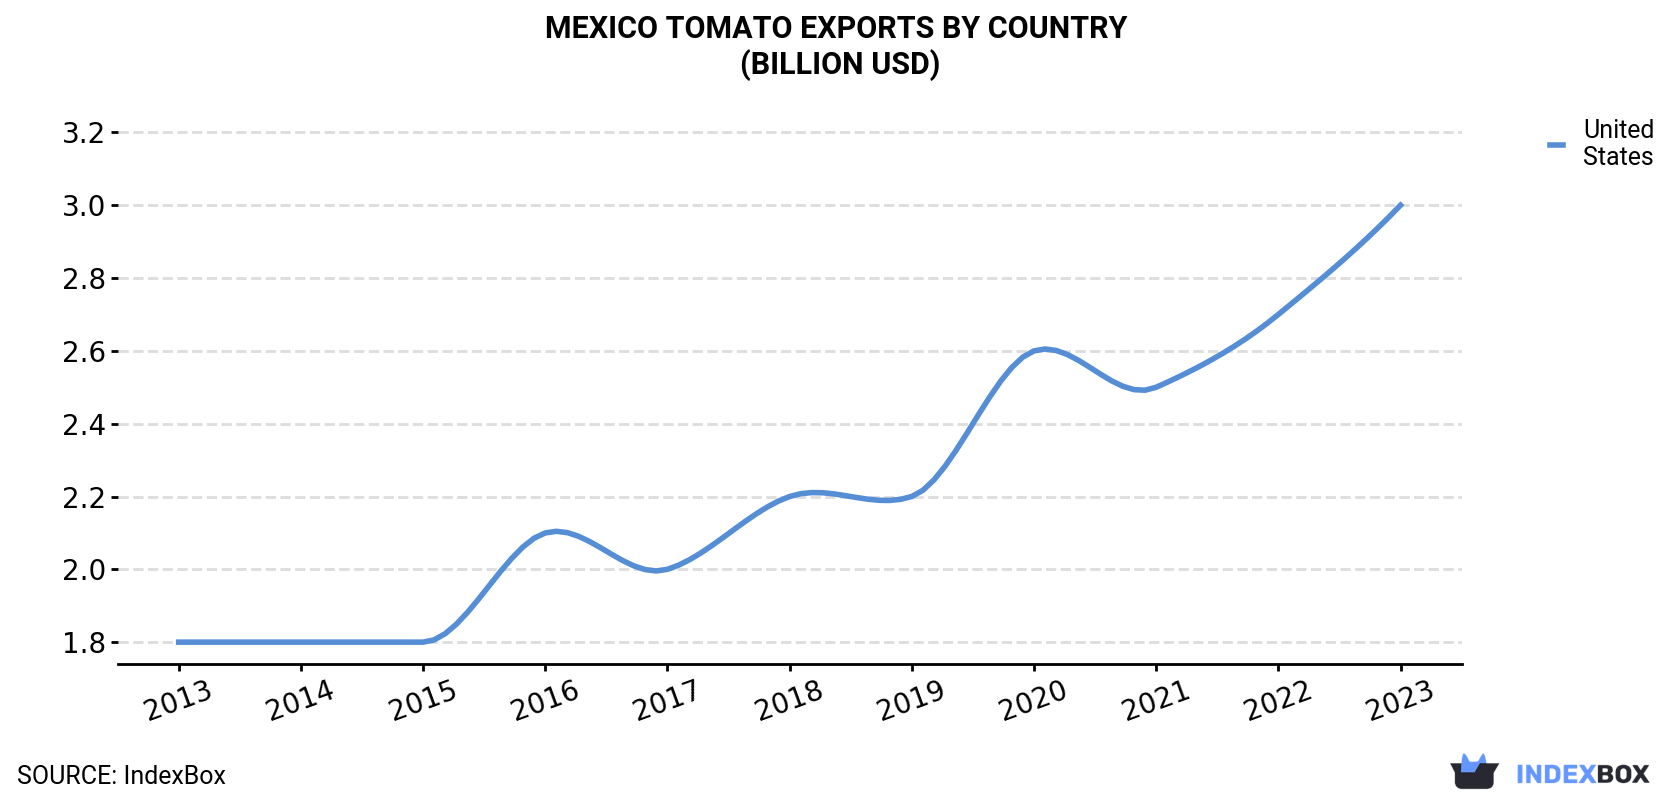 Mexico Tomato Exports By Country (Billion USD)